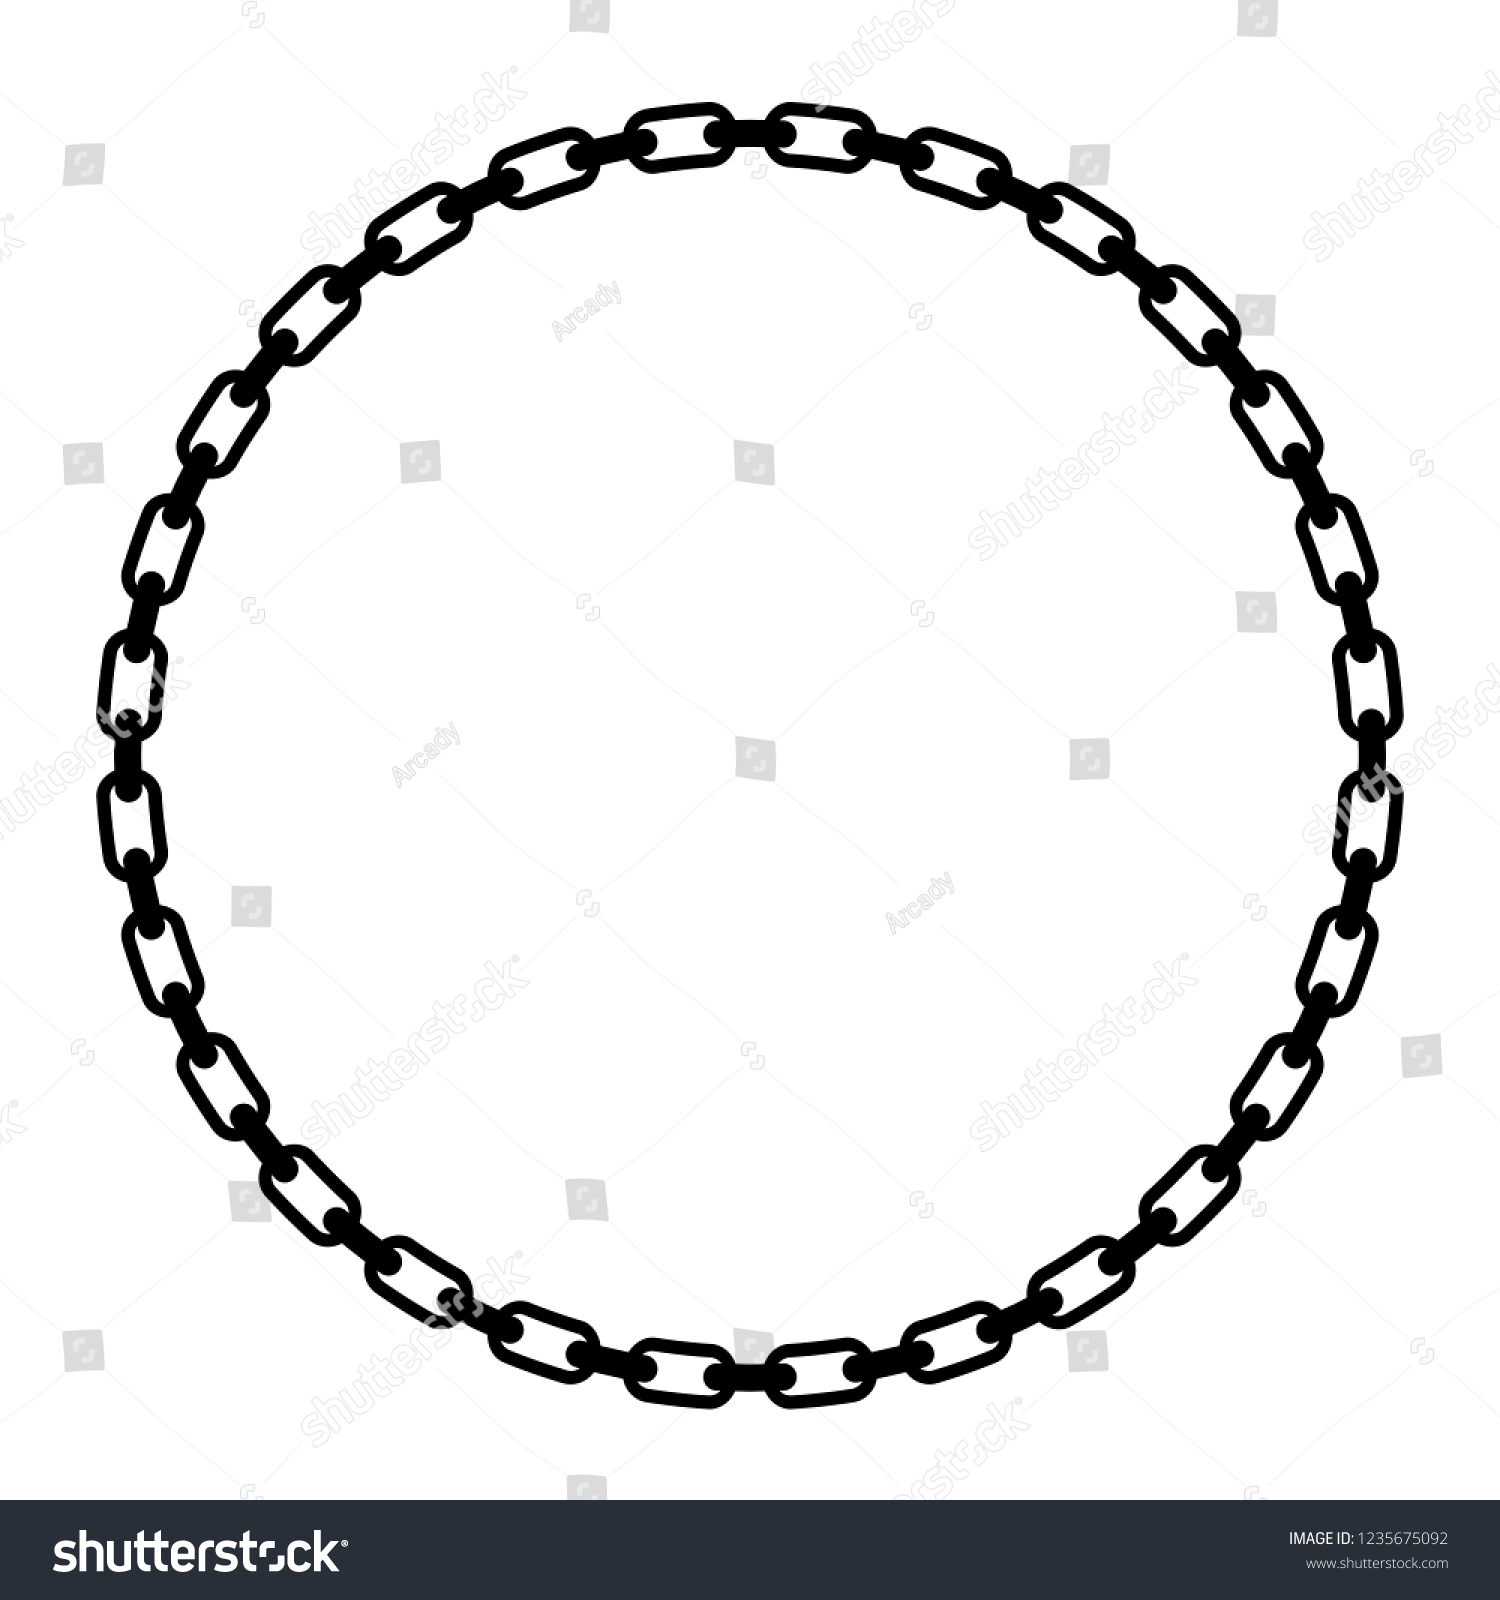 Chain Border Vector Graphics On White Stock Vector (Royalty Free ...